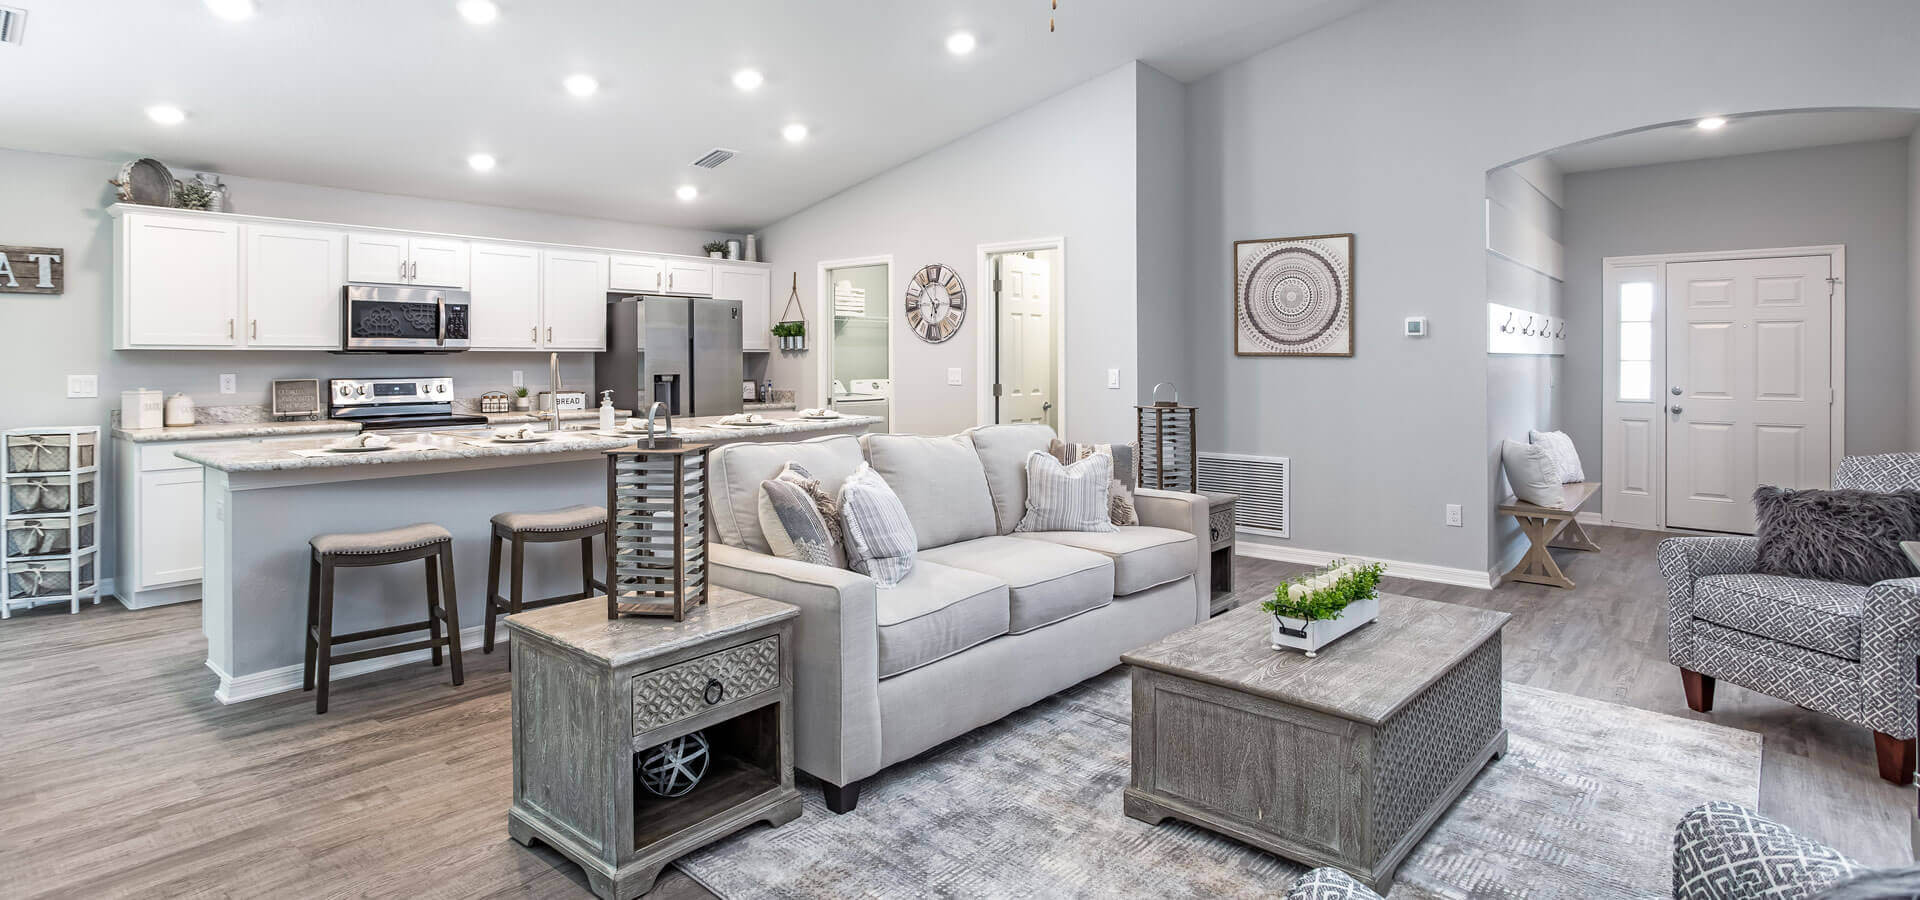 Raychel model by Highland Homes with a bright and open living area